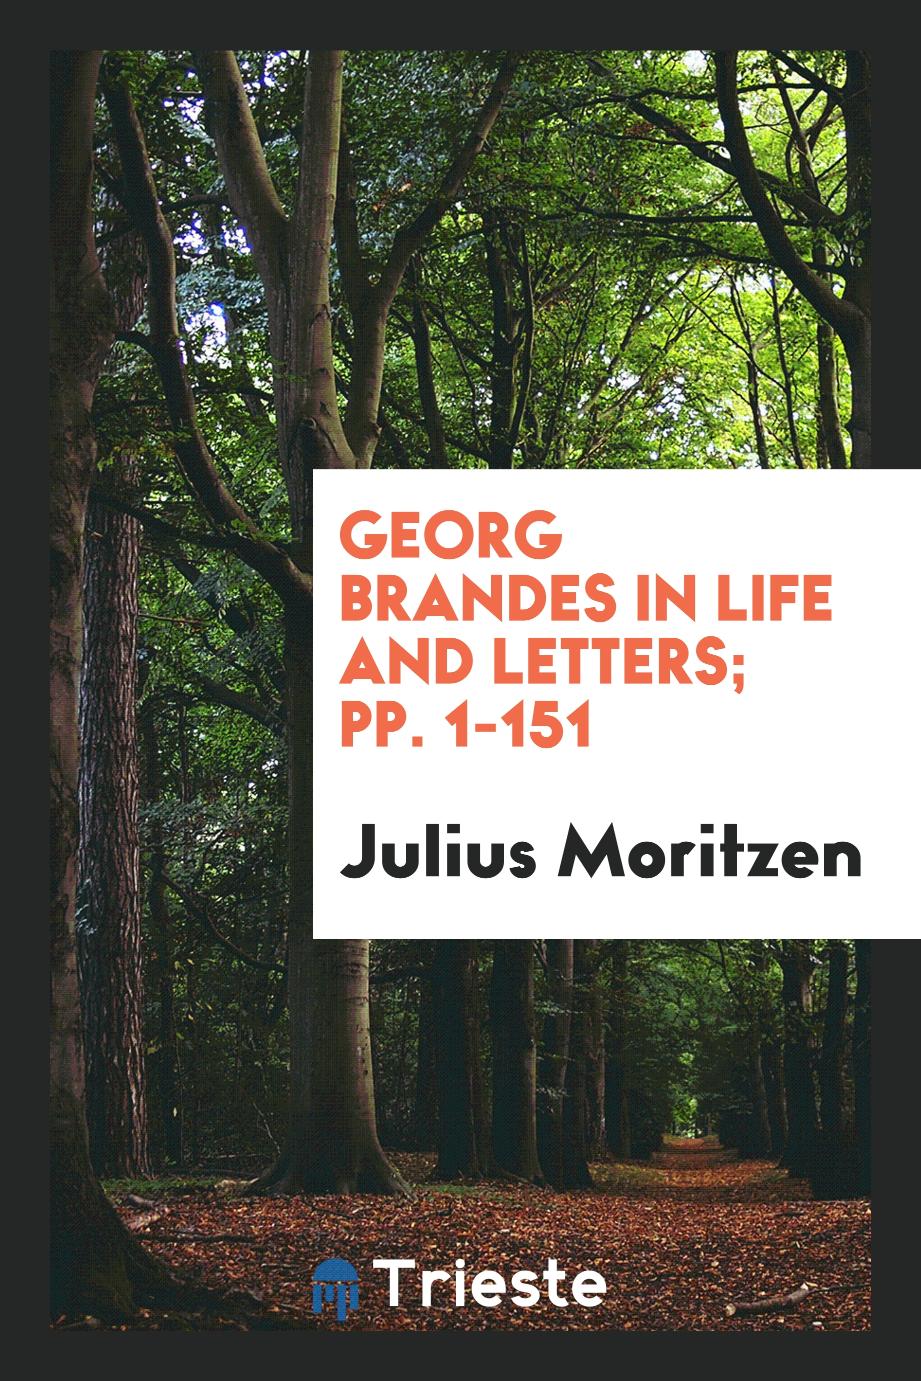 Georg Brandes in Life and Letters; pp. 1-151